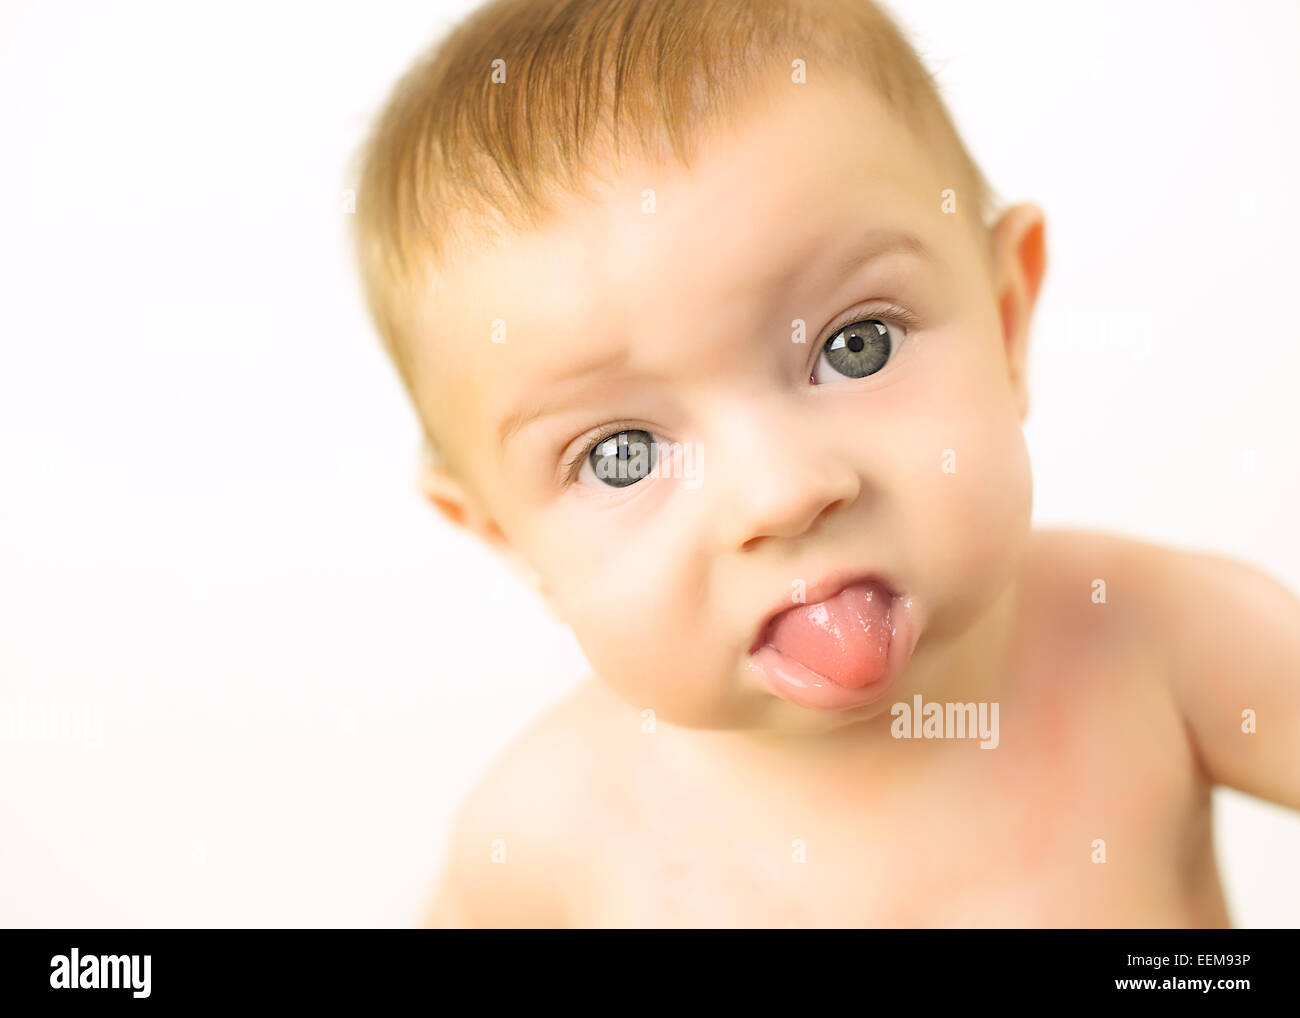 Portrait of a baby girl sticking out her tongue Stock Photo